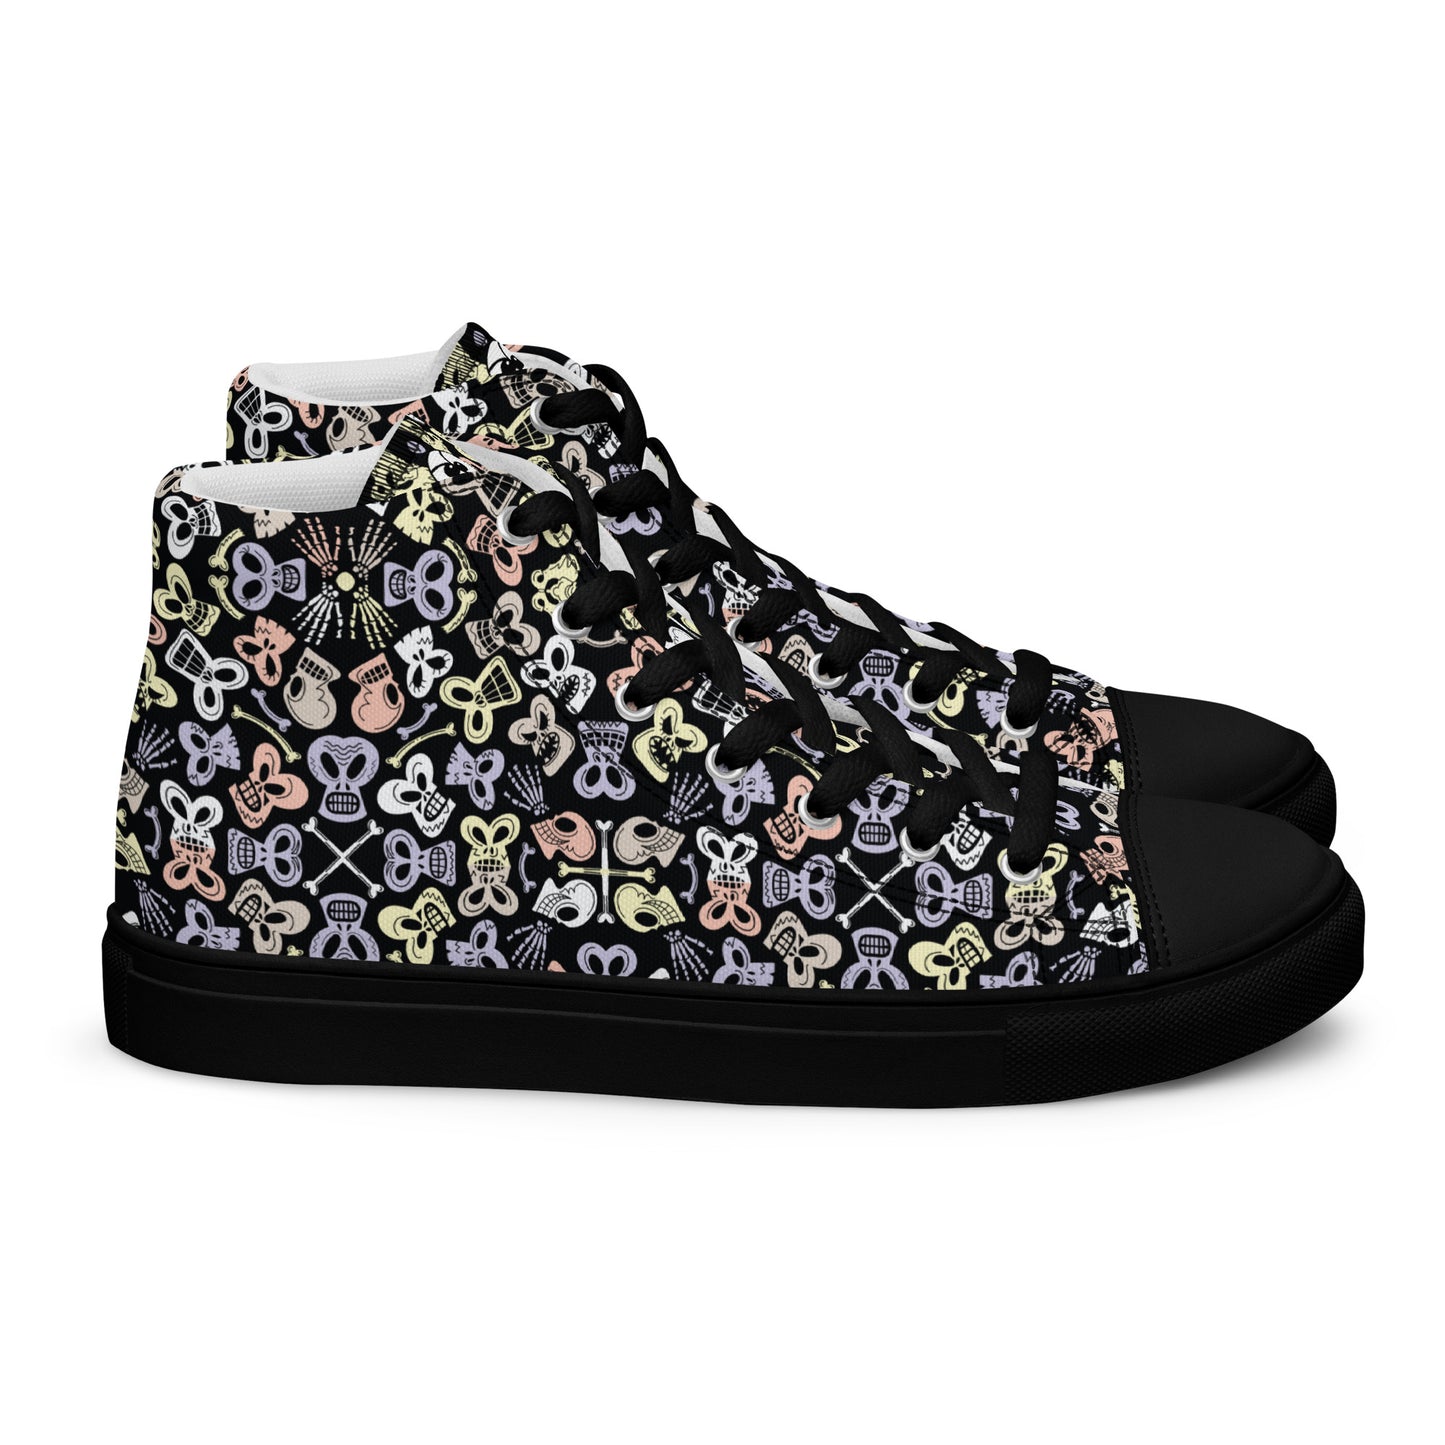 Bewitched Skulls: Hauntingly Chic Pattern Design - Women’s high top canvas shoes. Black color. Side view